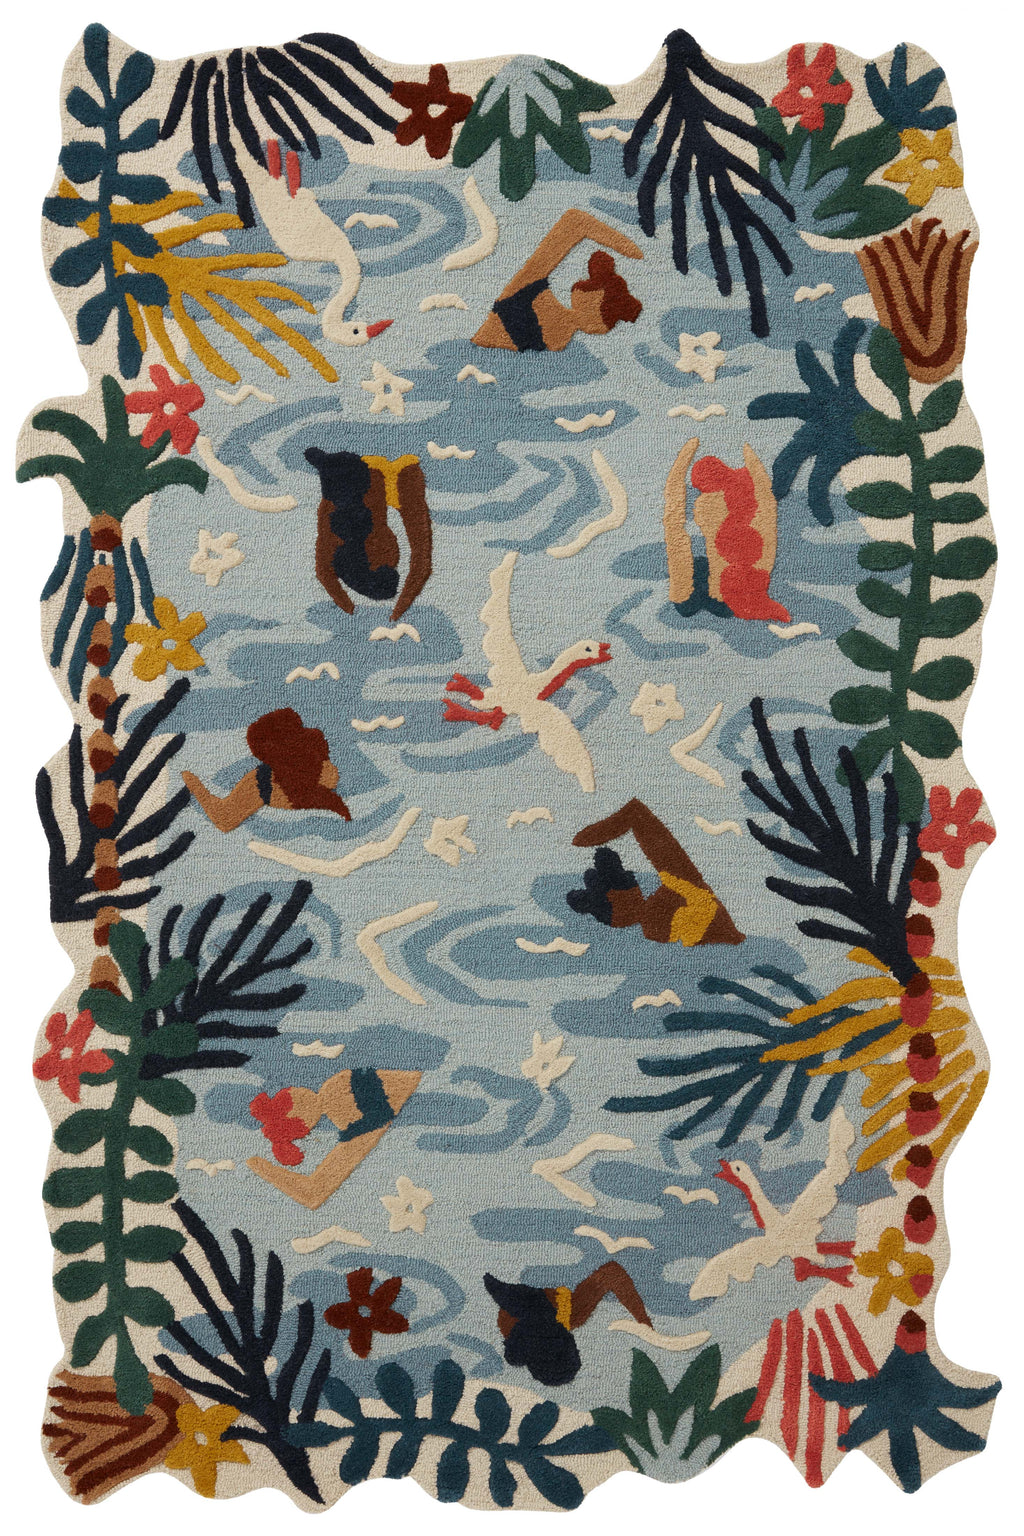 OPTIMISM Collection Wool Rug  in  OCEAN / MULTI Blue Accent Hand-Tufted Wool